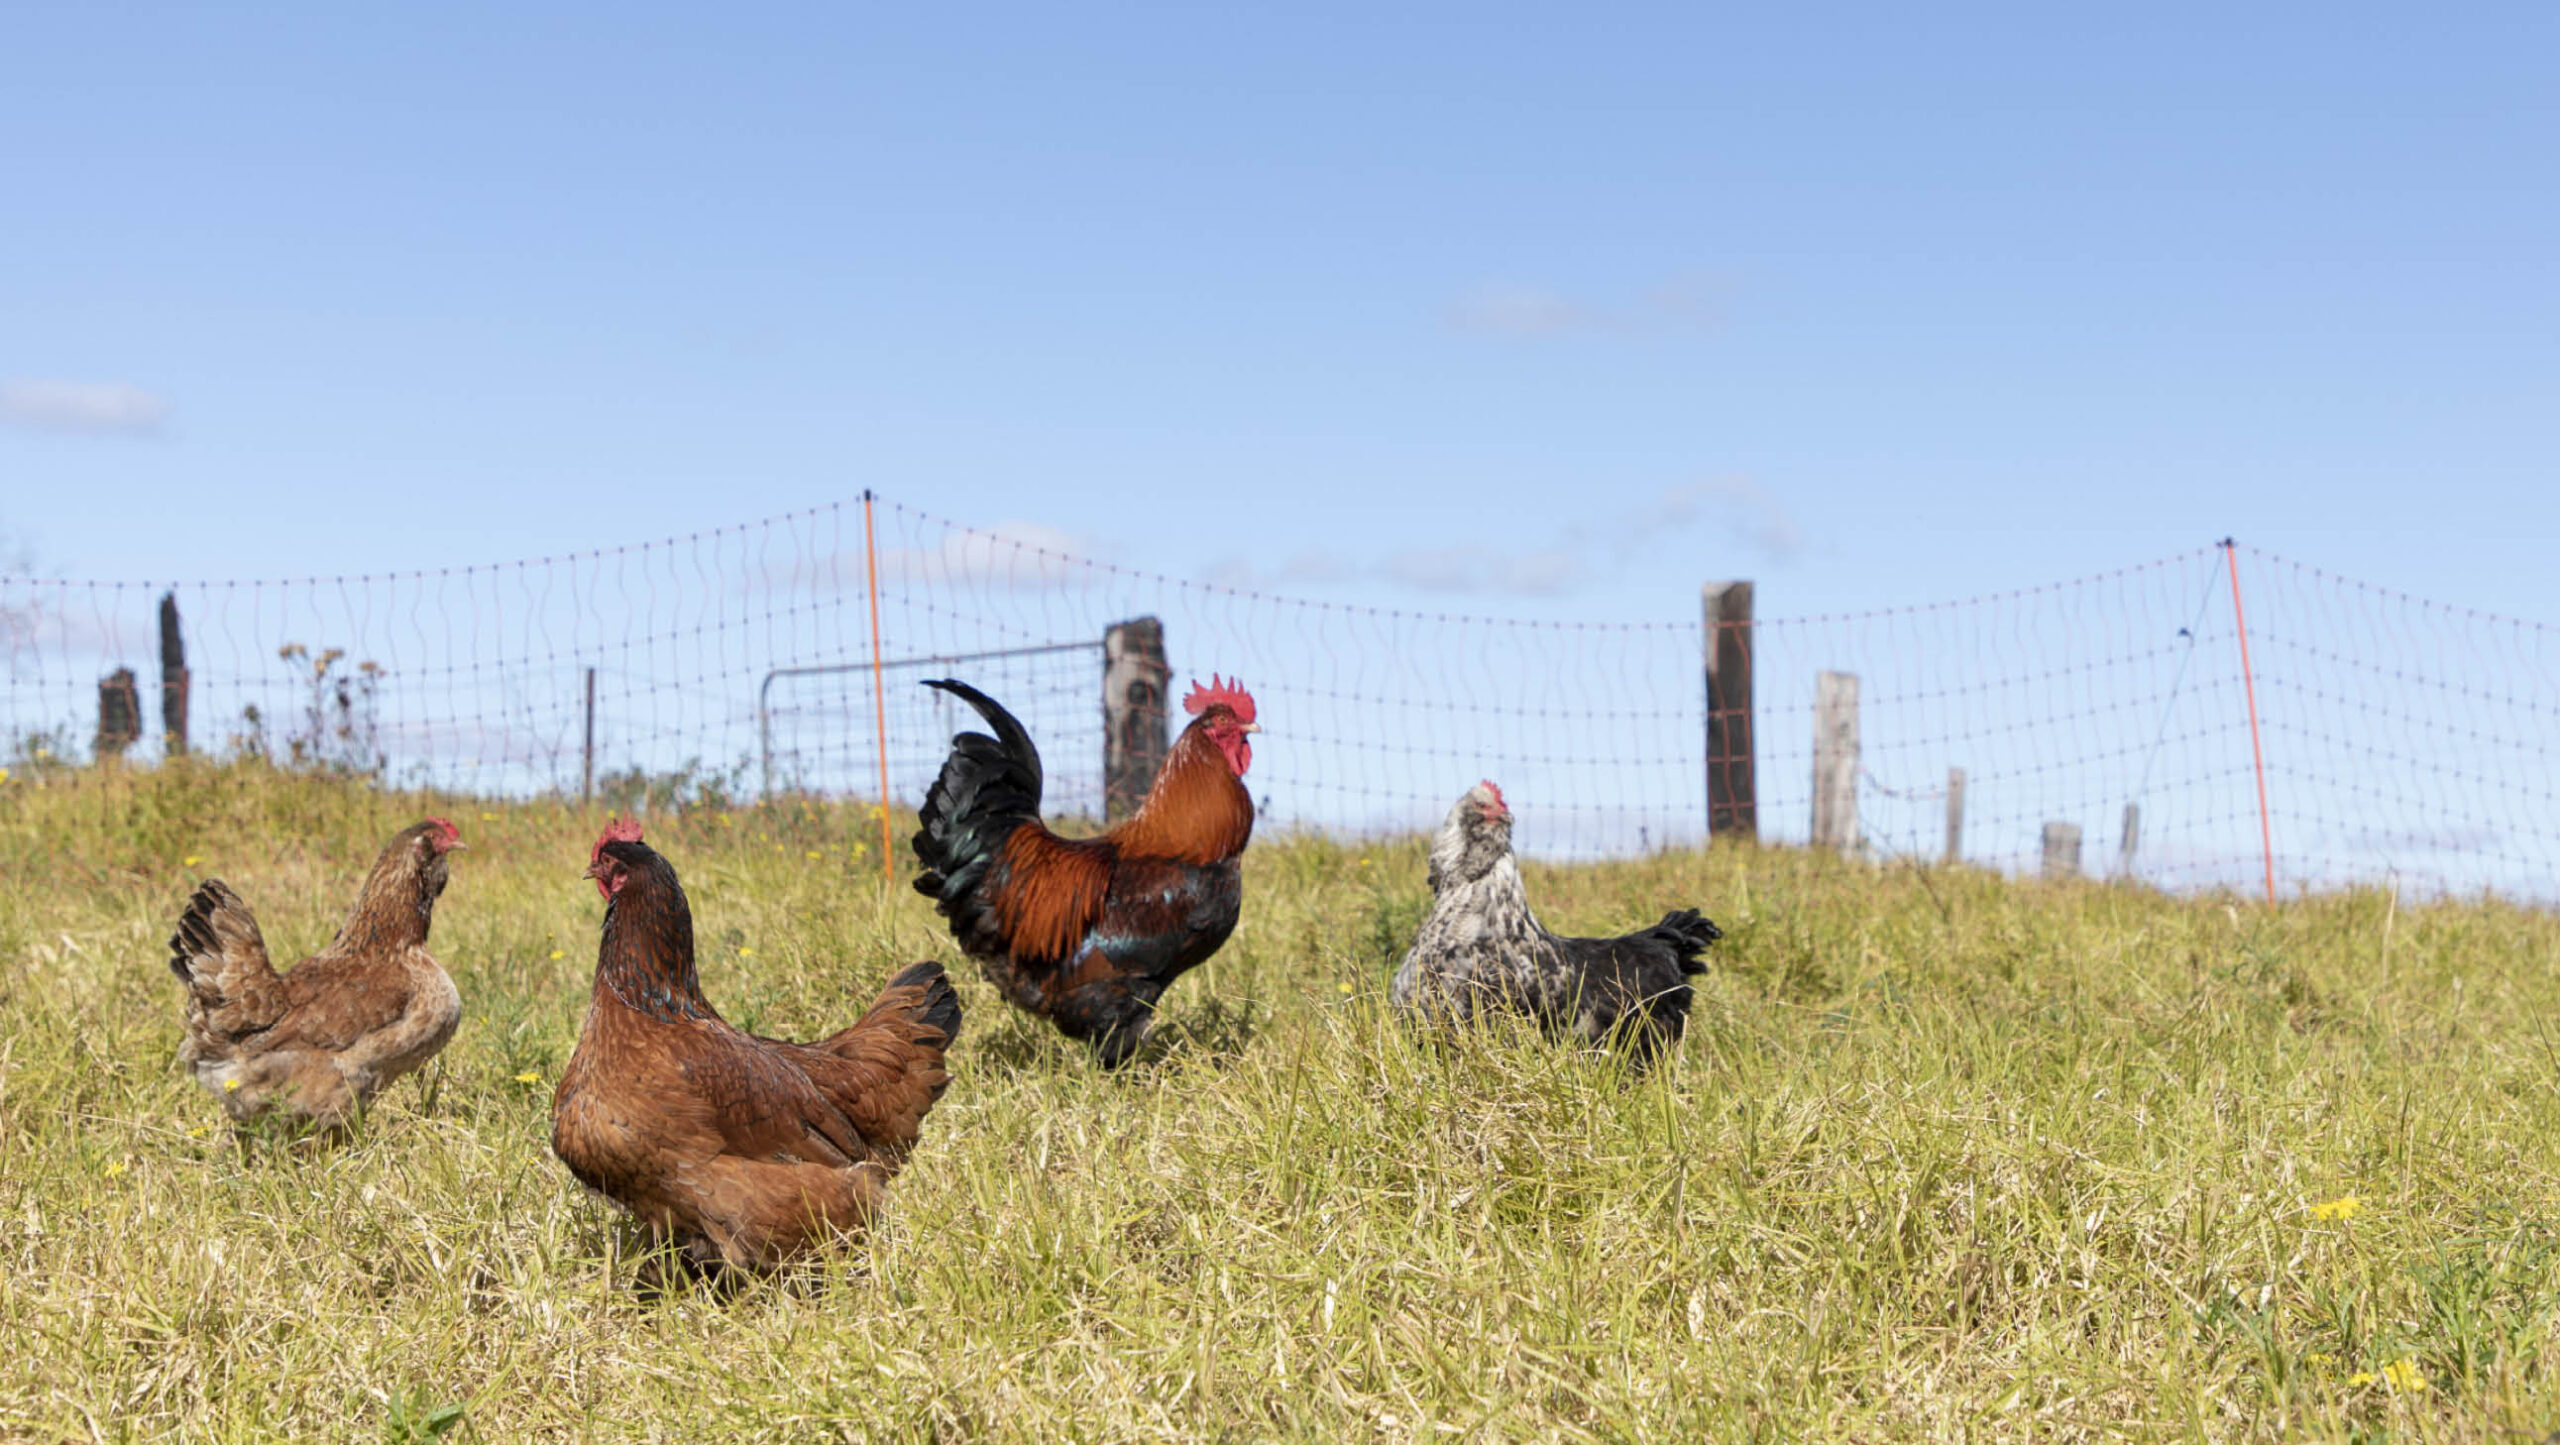 Finding an alternative homes for your chooks during a bushfire can be difficult.